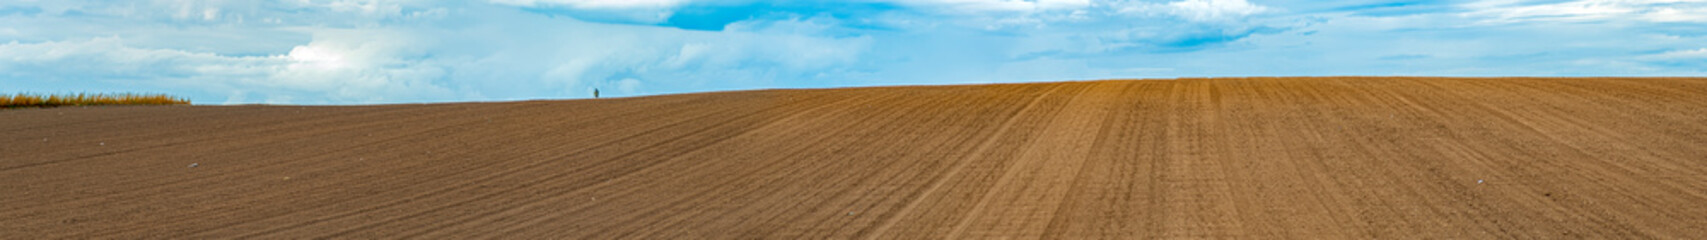 Landscape with agricultural land, in slope, recently plowed and prepared for the crop